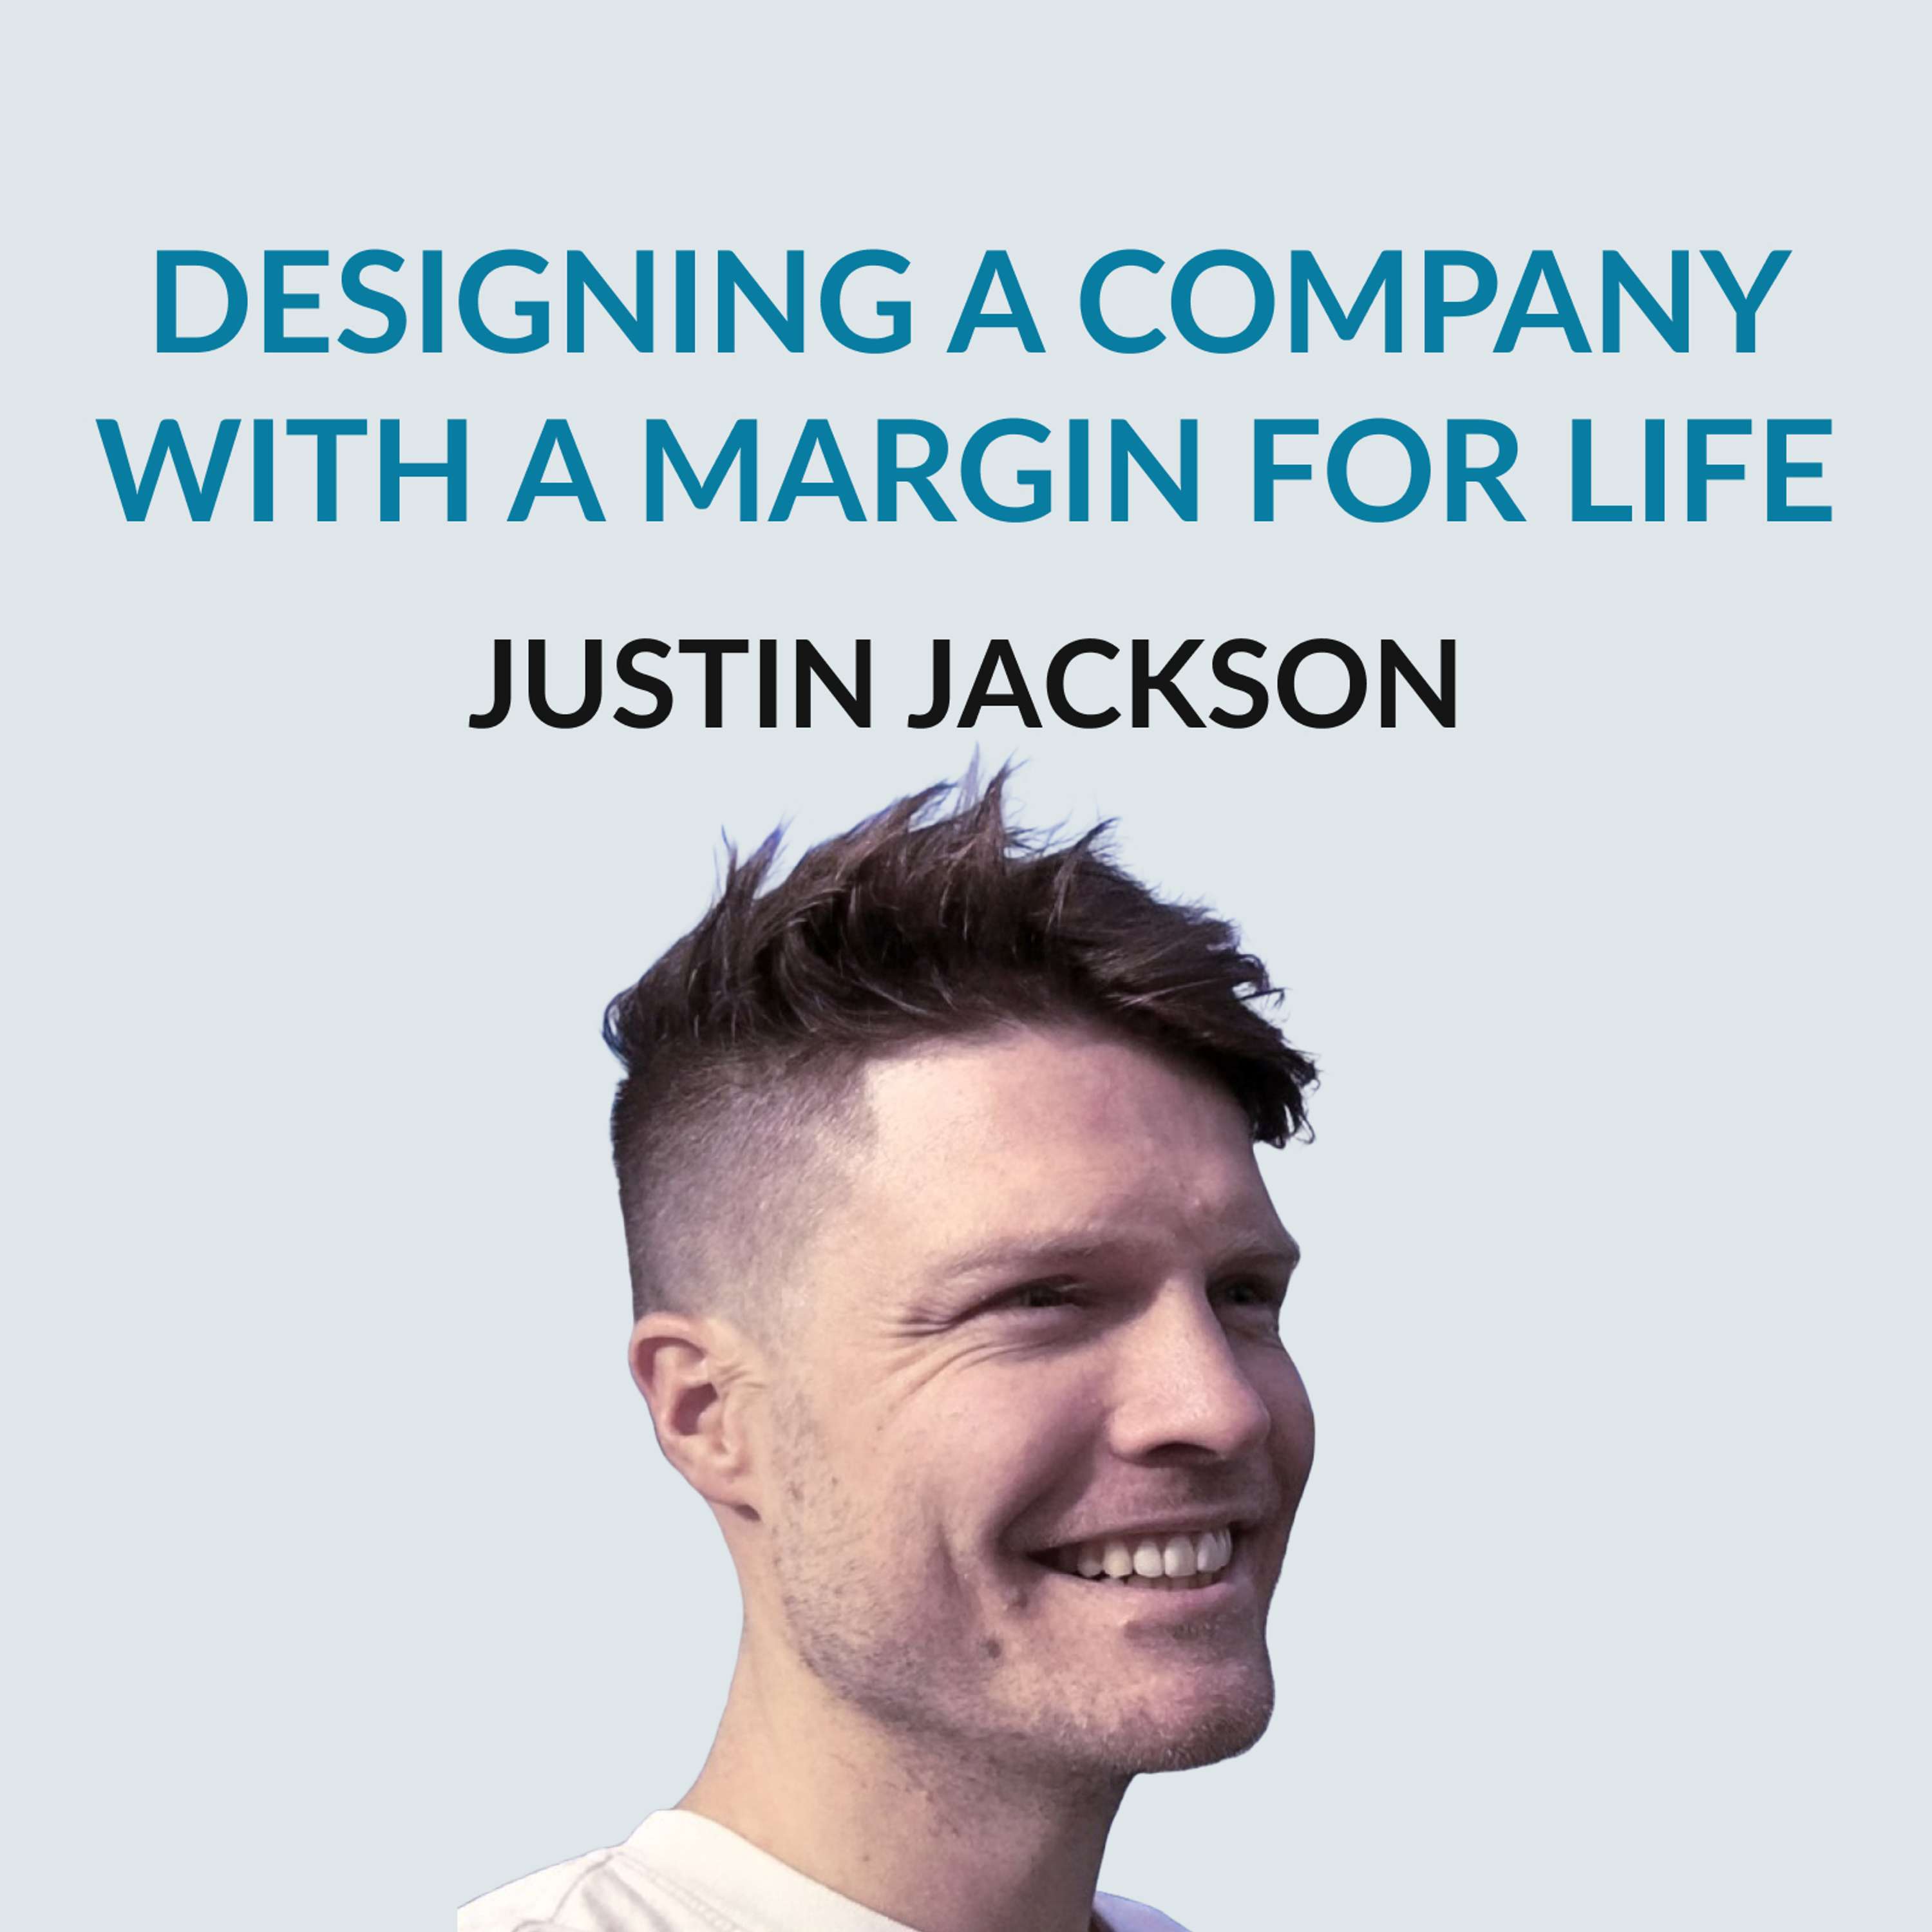 #168 Building With "margin for life" — Justin Jackson on lessons from running a skate shop, optimizing for profit, running a "calm company," co-founding Transistor, having kids early, designing margins and how money actually does make him happy